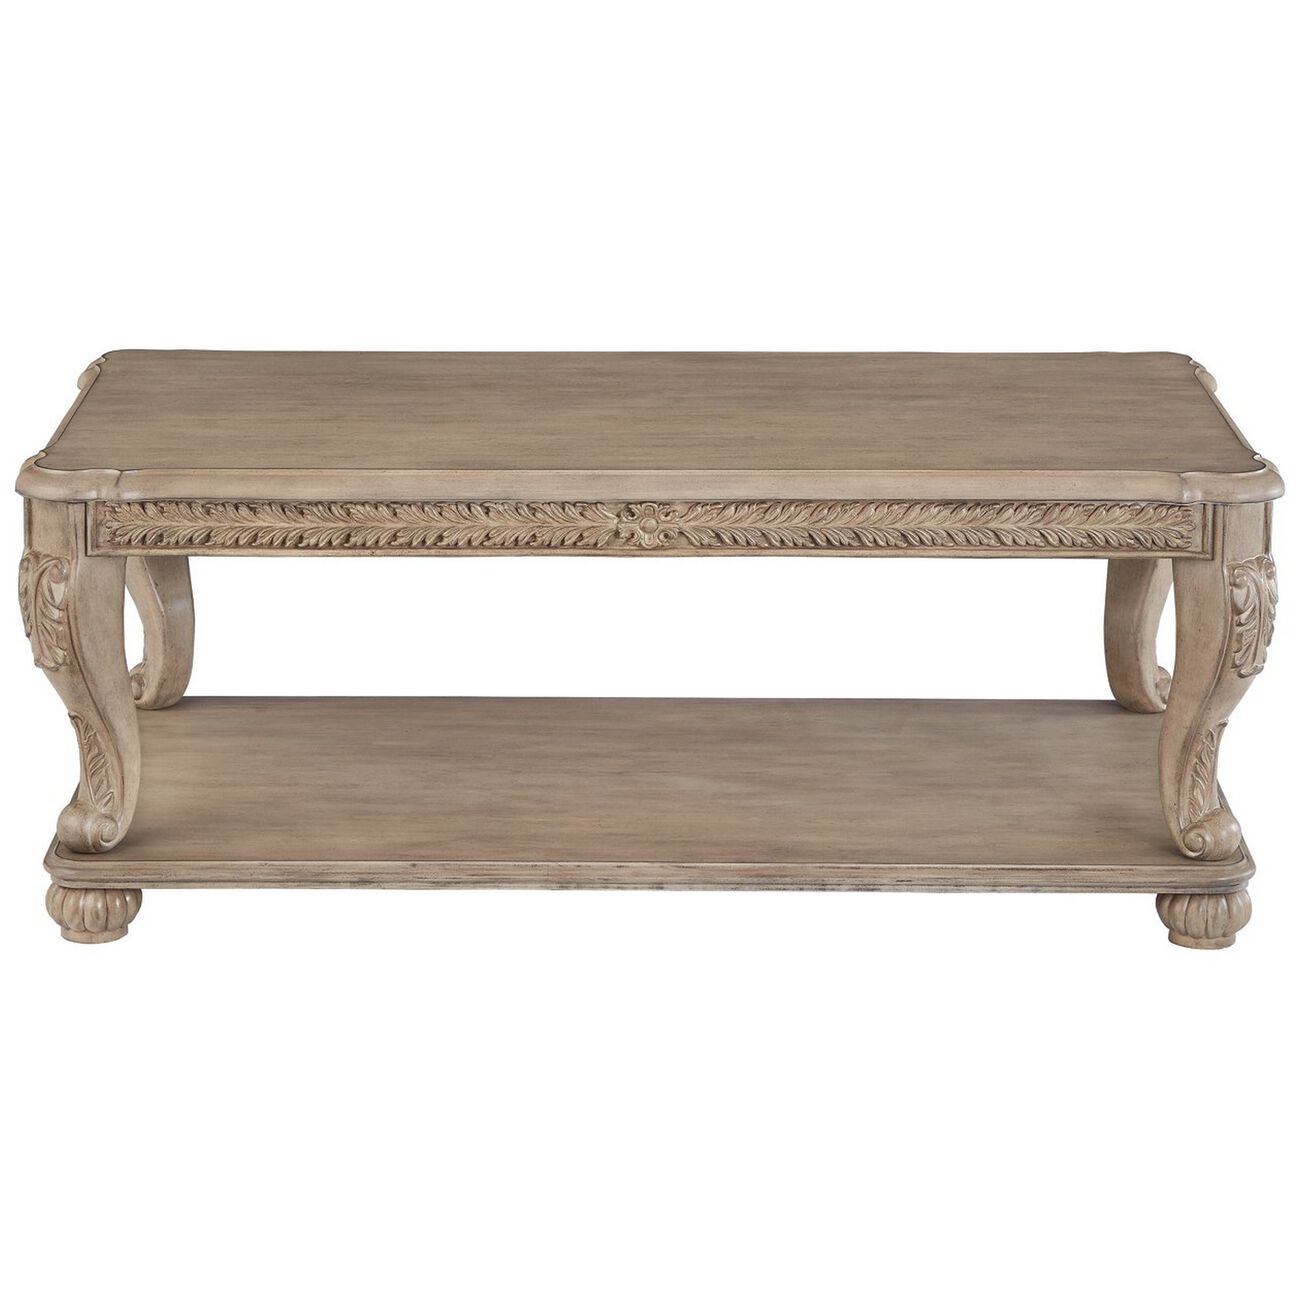 Wooden Rectangular Coffee Table with Engravings and Bottom Shelf, Brown